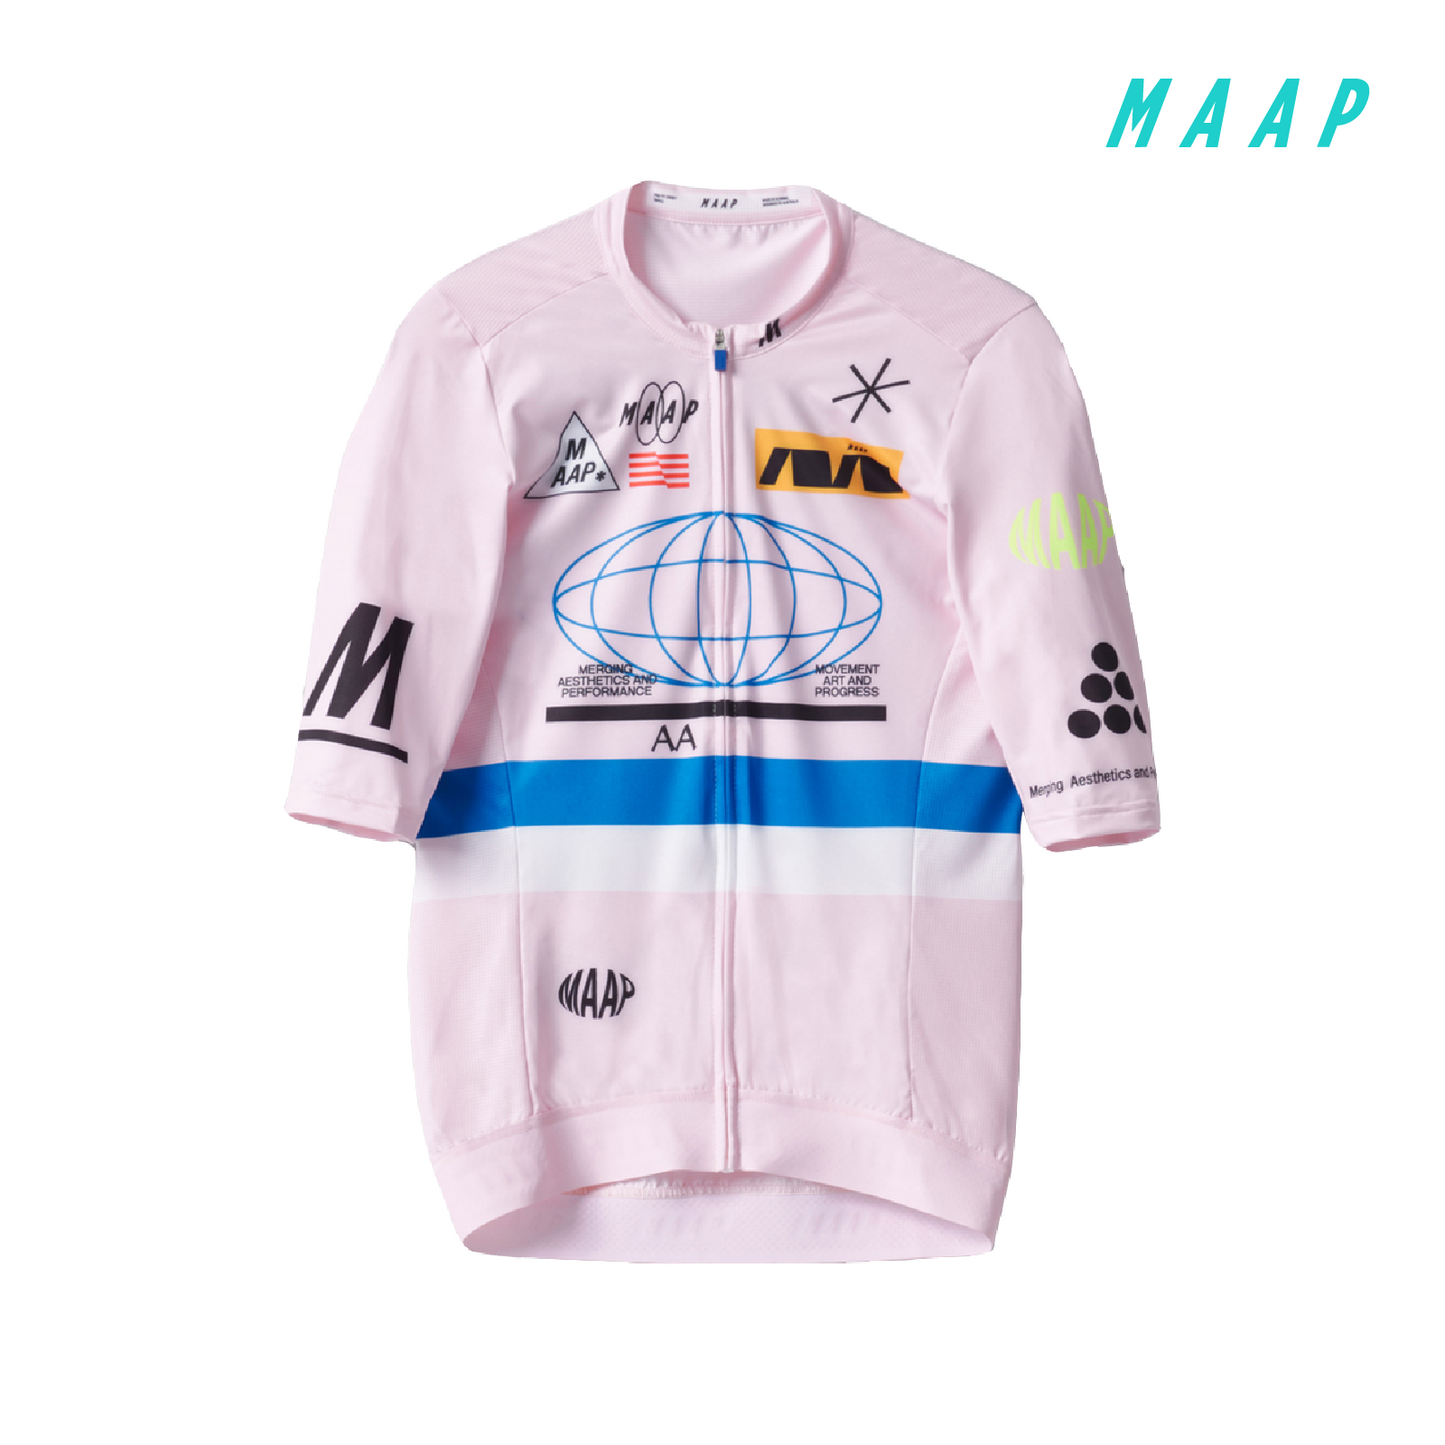 Axis Pro Jersey Pale Pink